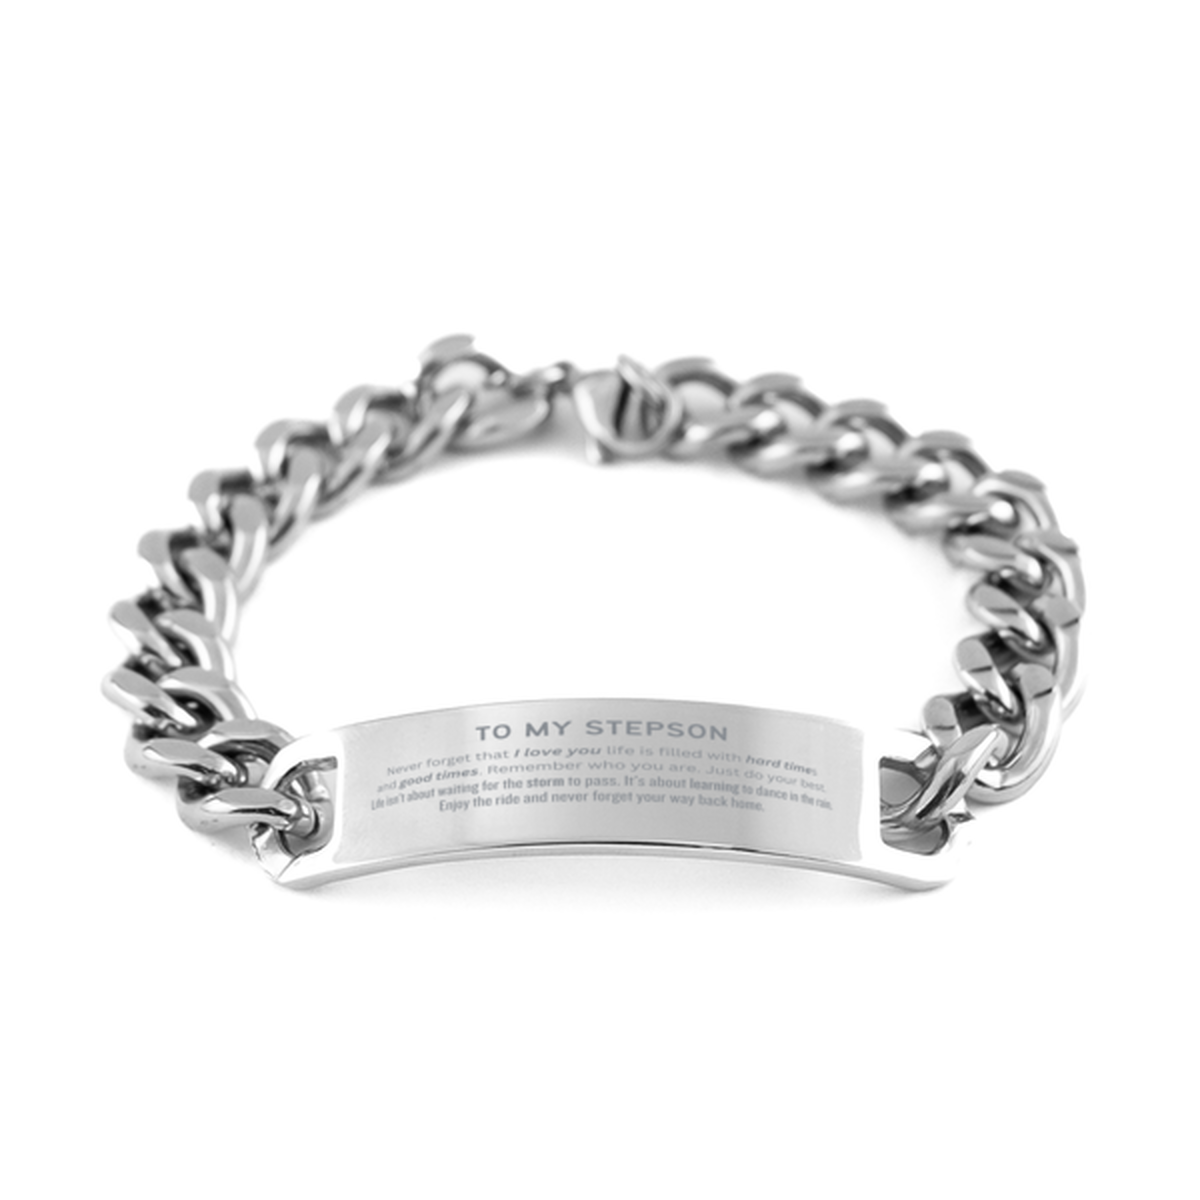 Christmas Stepson Cuban Chain Stainless Steel Bracelet Gifts, To My Stepson Birthday Thank You Gifts For Stepson, Graduation Unique Gifts For Stepson To My Stepson Never forget that I love you life is filled with hard times and good times. Remember who yo